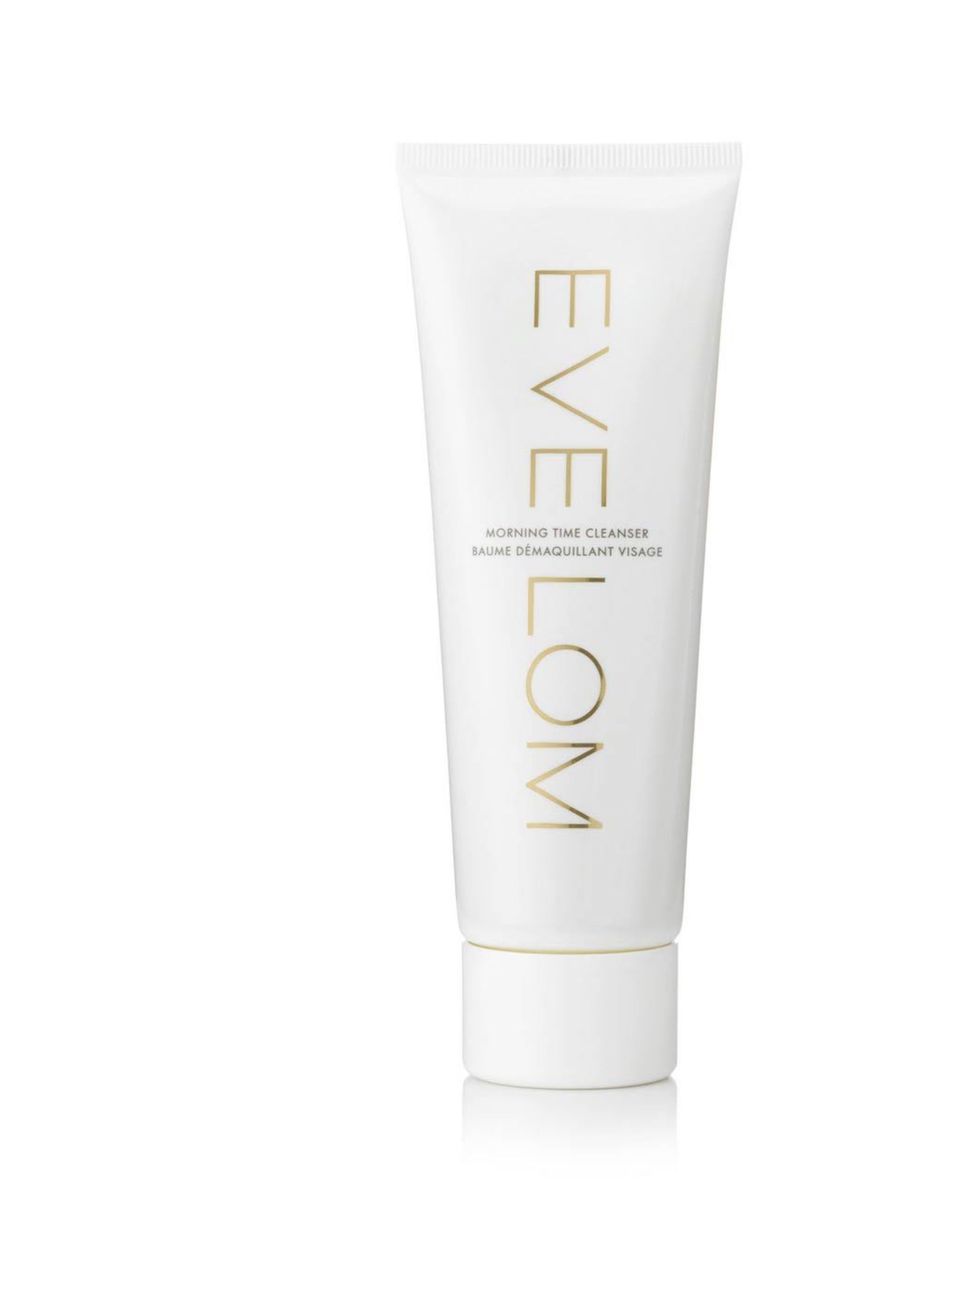 <p><a href="http://www.theukedit.com/eve-lom-morning-time-cleanser-125ml/10364332.html"></a></p><p>Lorraine Candy, Editor in Chief</p><p>'Between the school run, gym and morning meetings, time is not my friend first thing. This easy wash off cleaner is pe